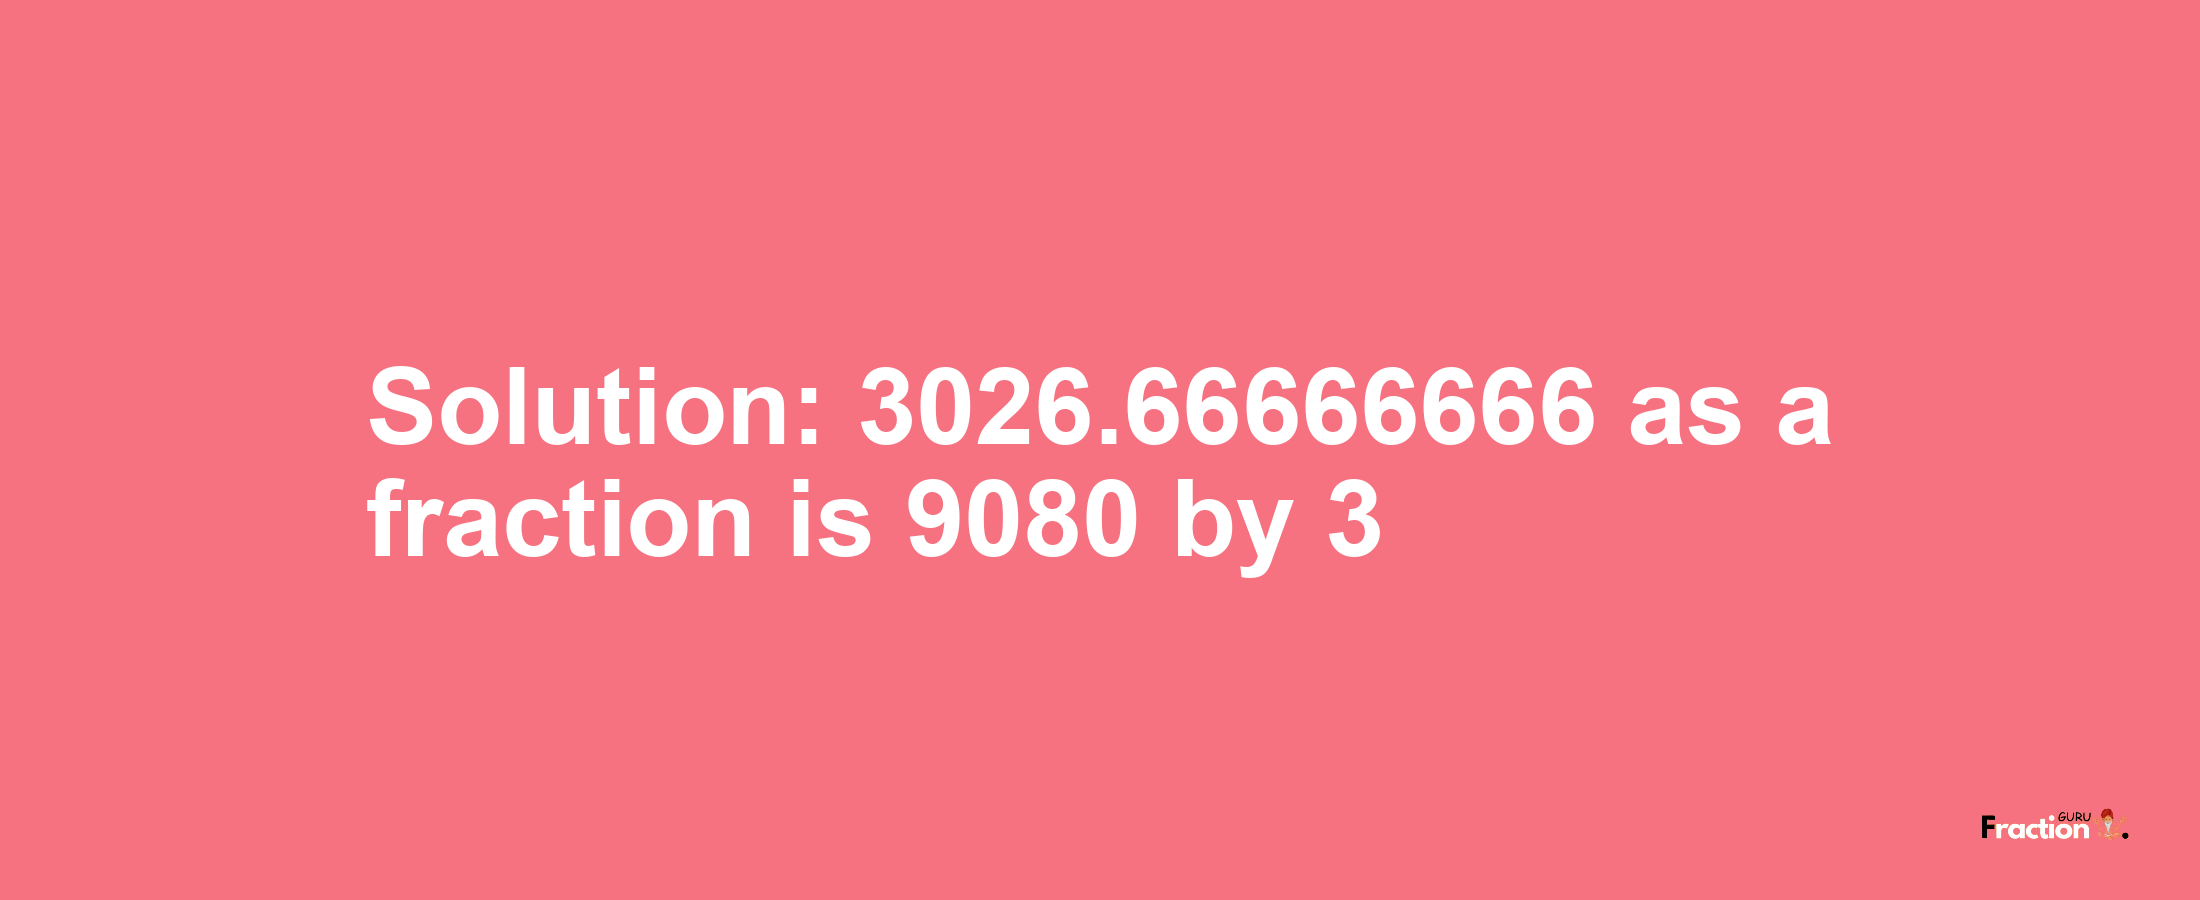 Solution:3026.66666666 as a fraction is 9080/3